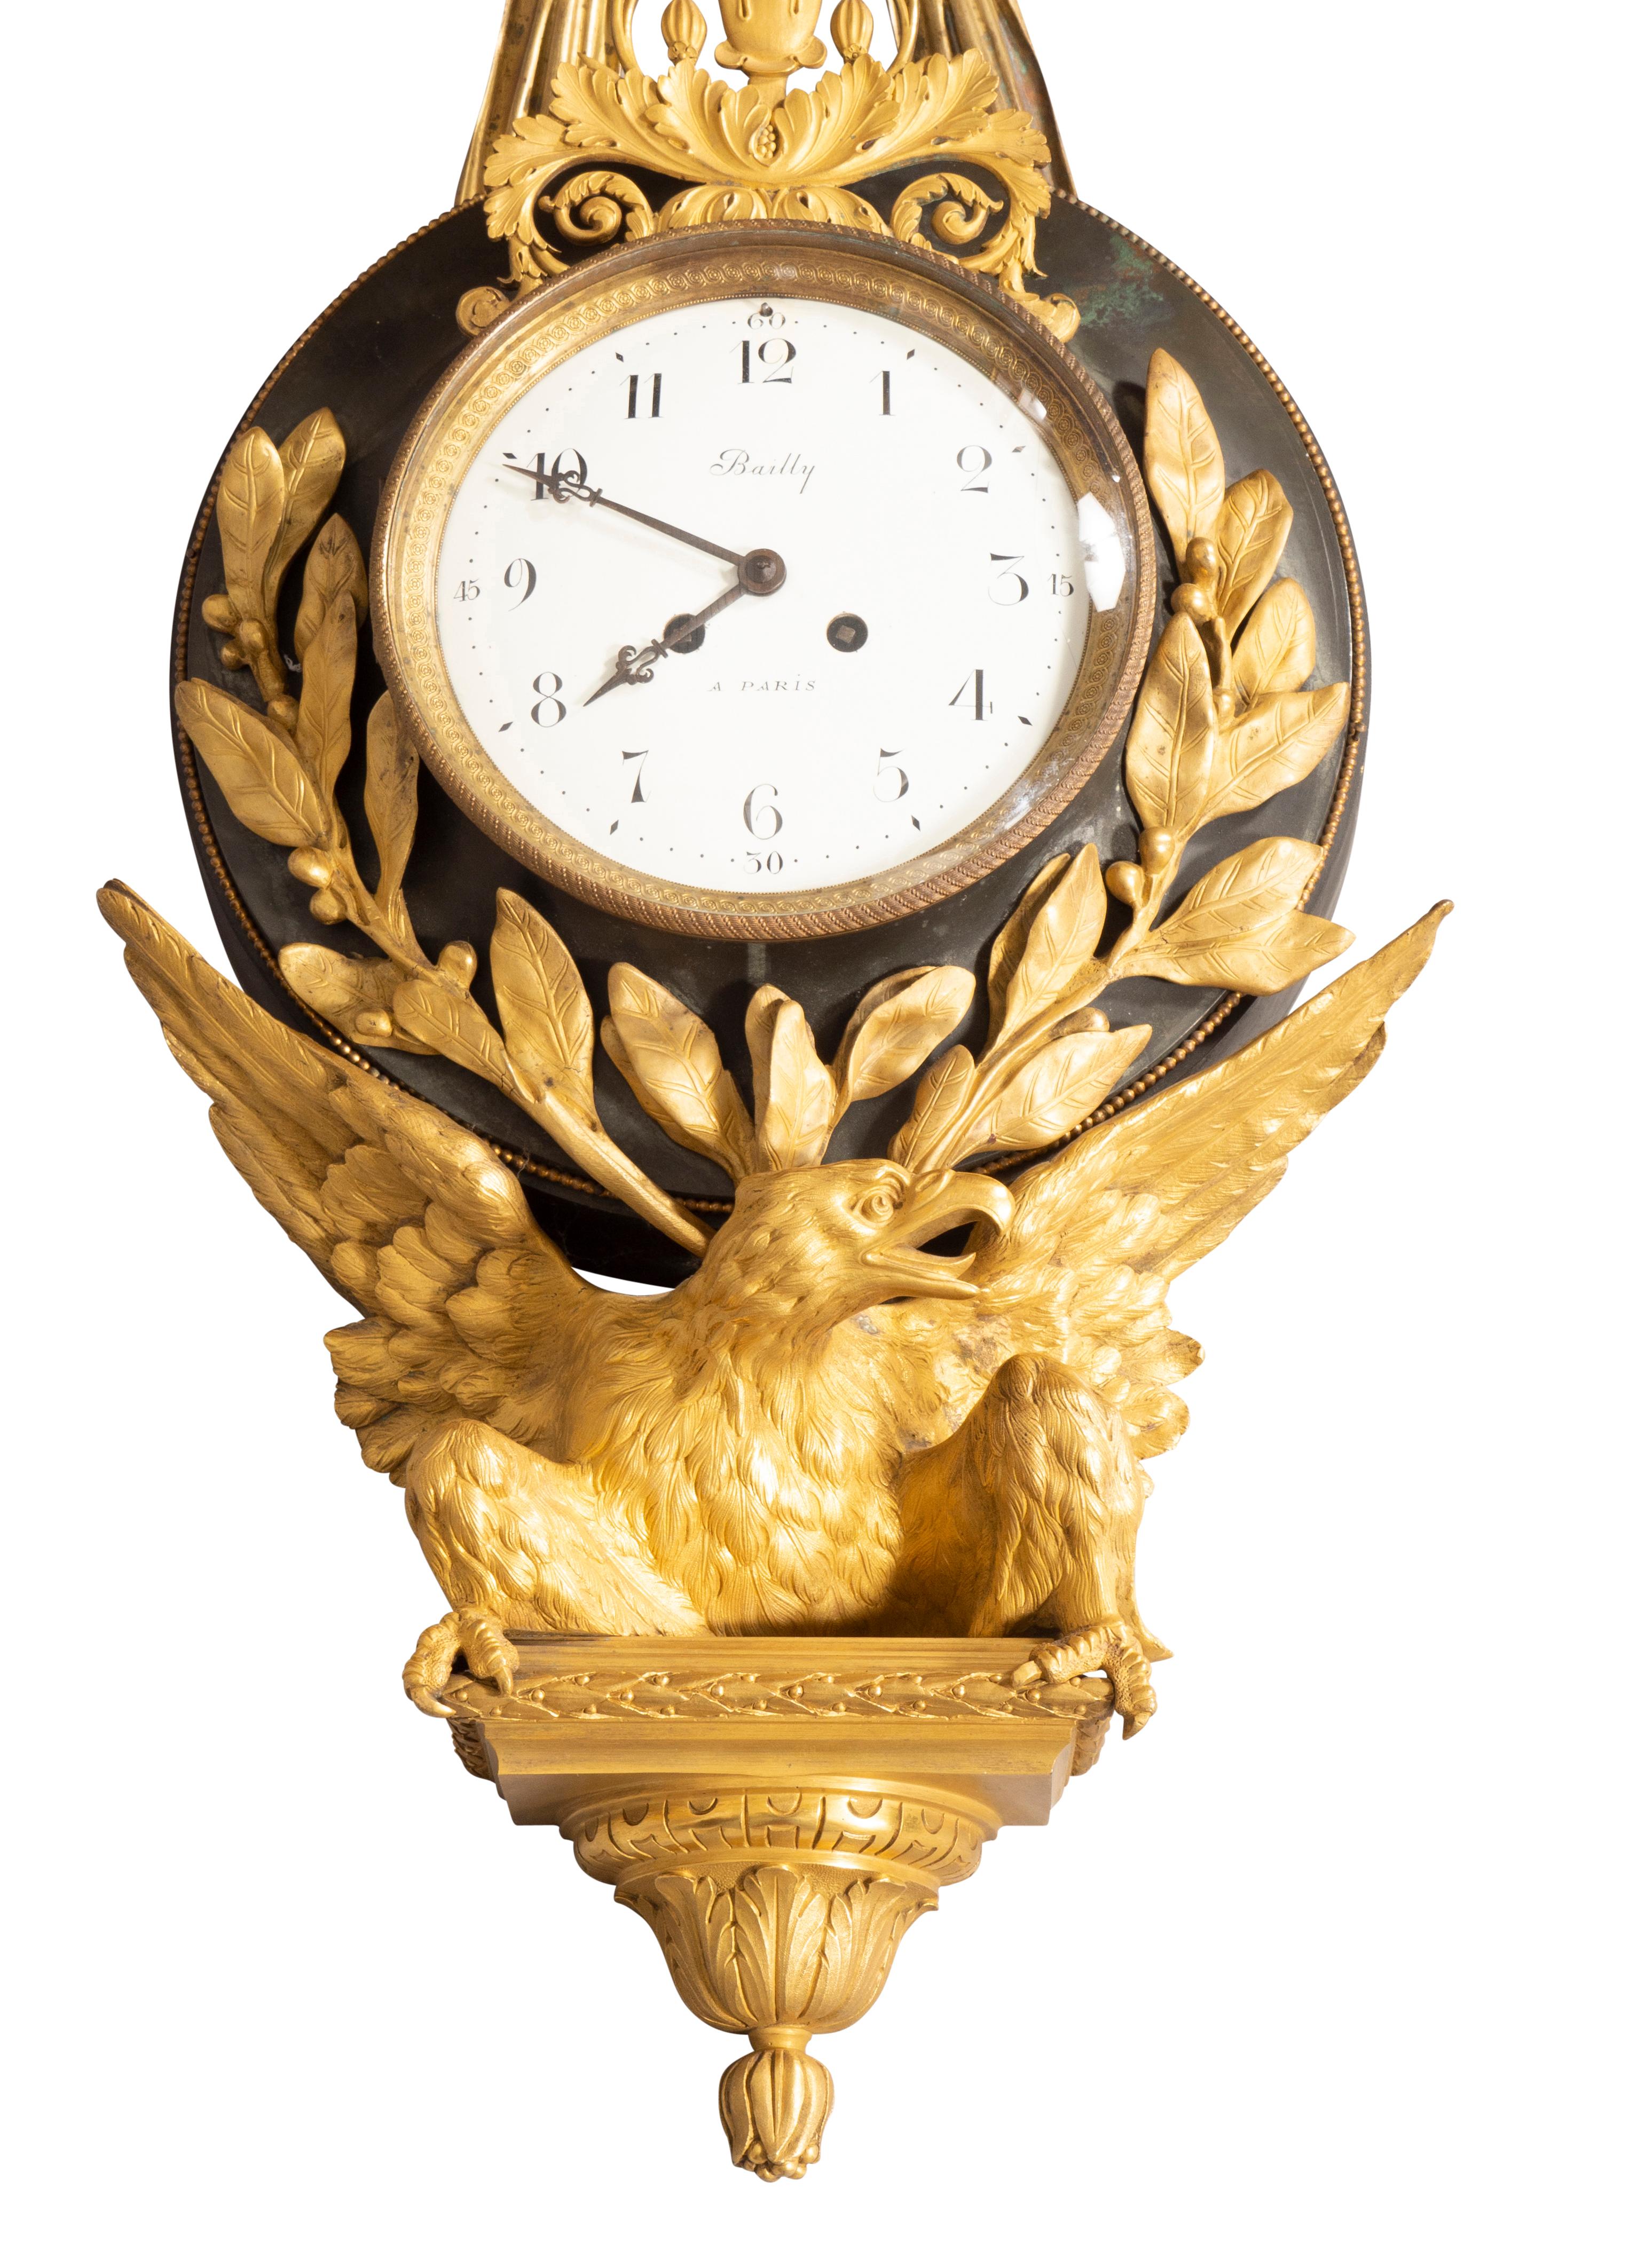 Empire Bronze and Ormolu Cartel Clock by Bailly, Paris For Sale 4